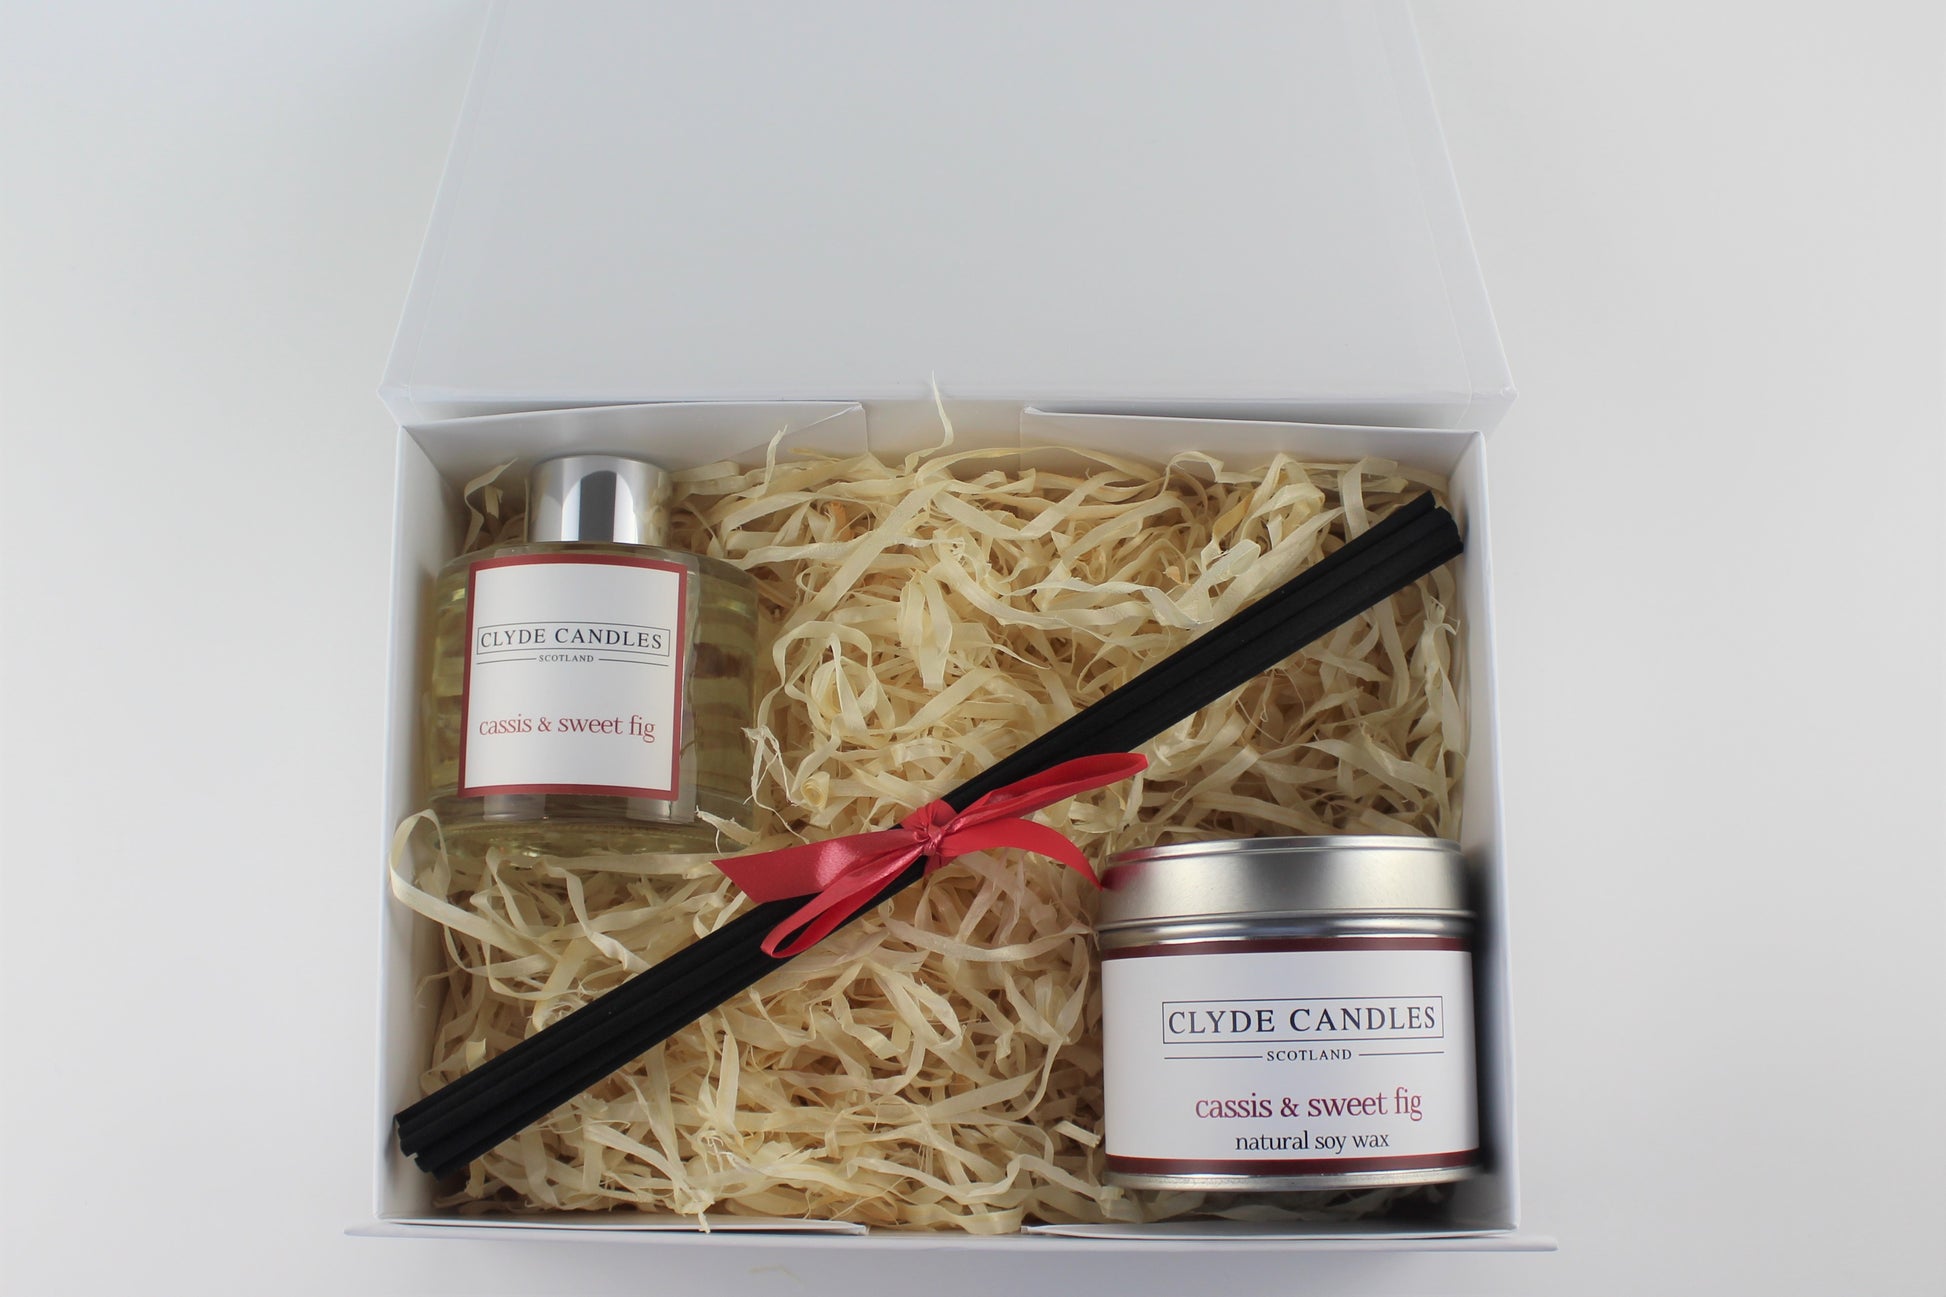 Cassis & Sweet Fig Diffuser & Candle Gift Box Set - Scottish Natural Soy Candle